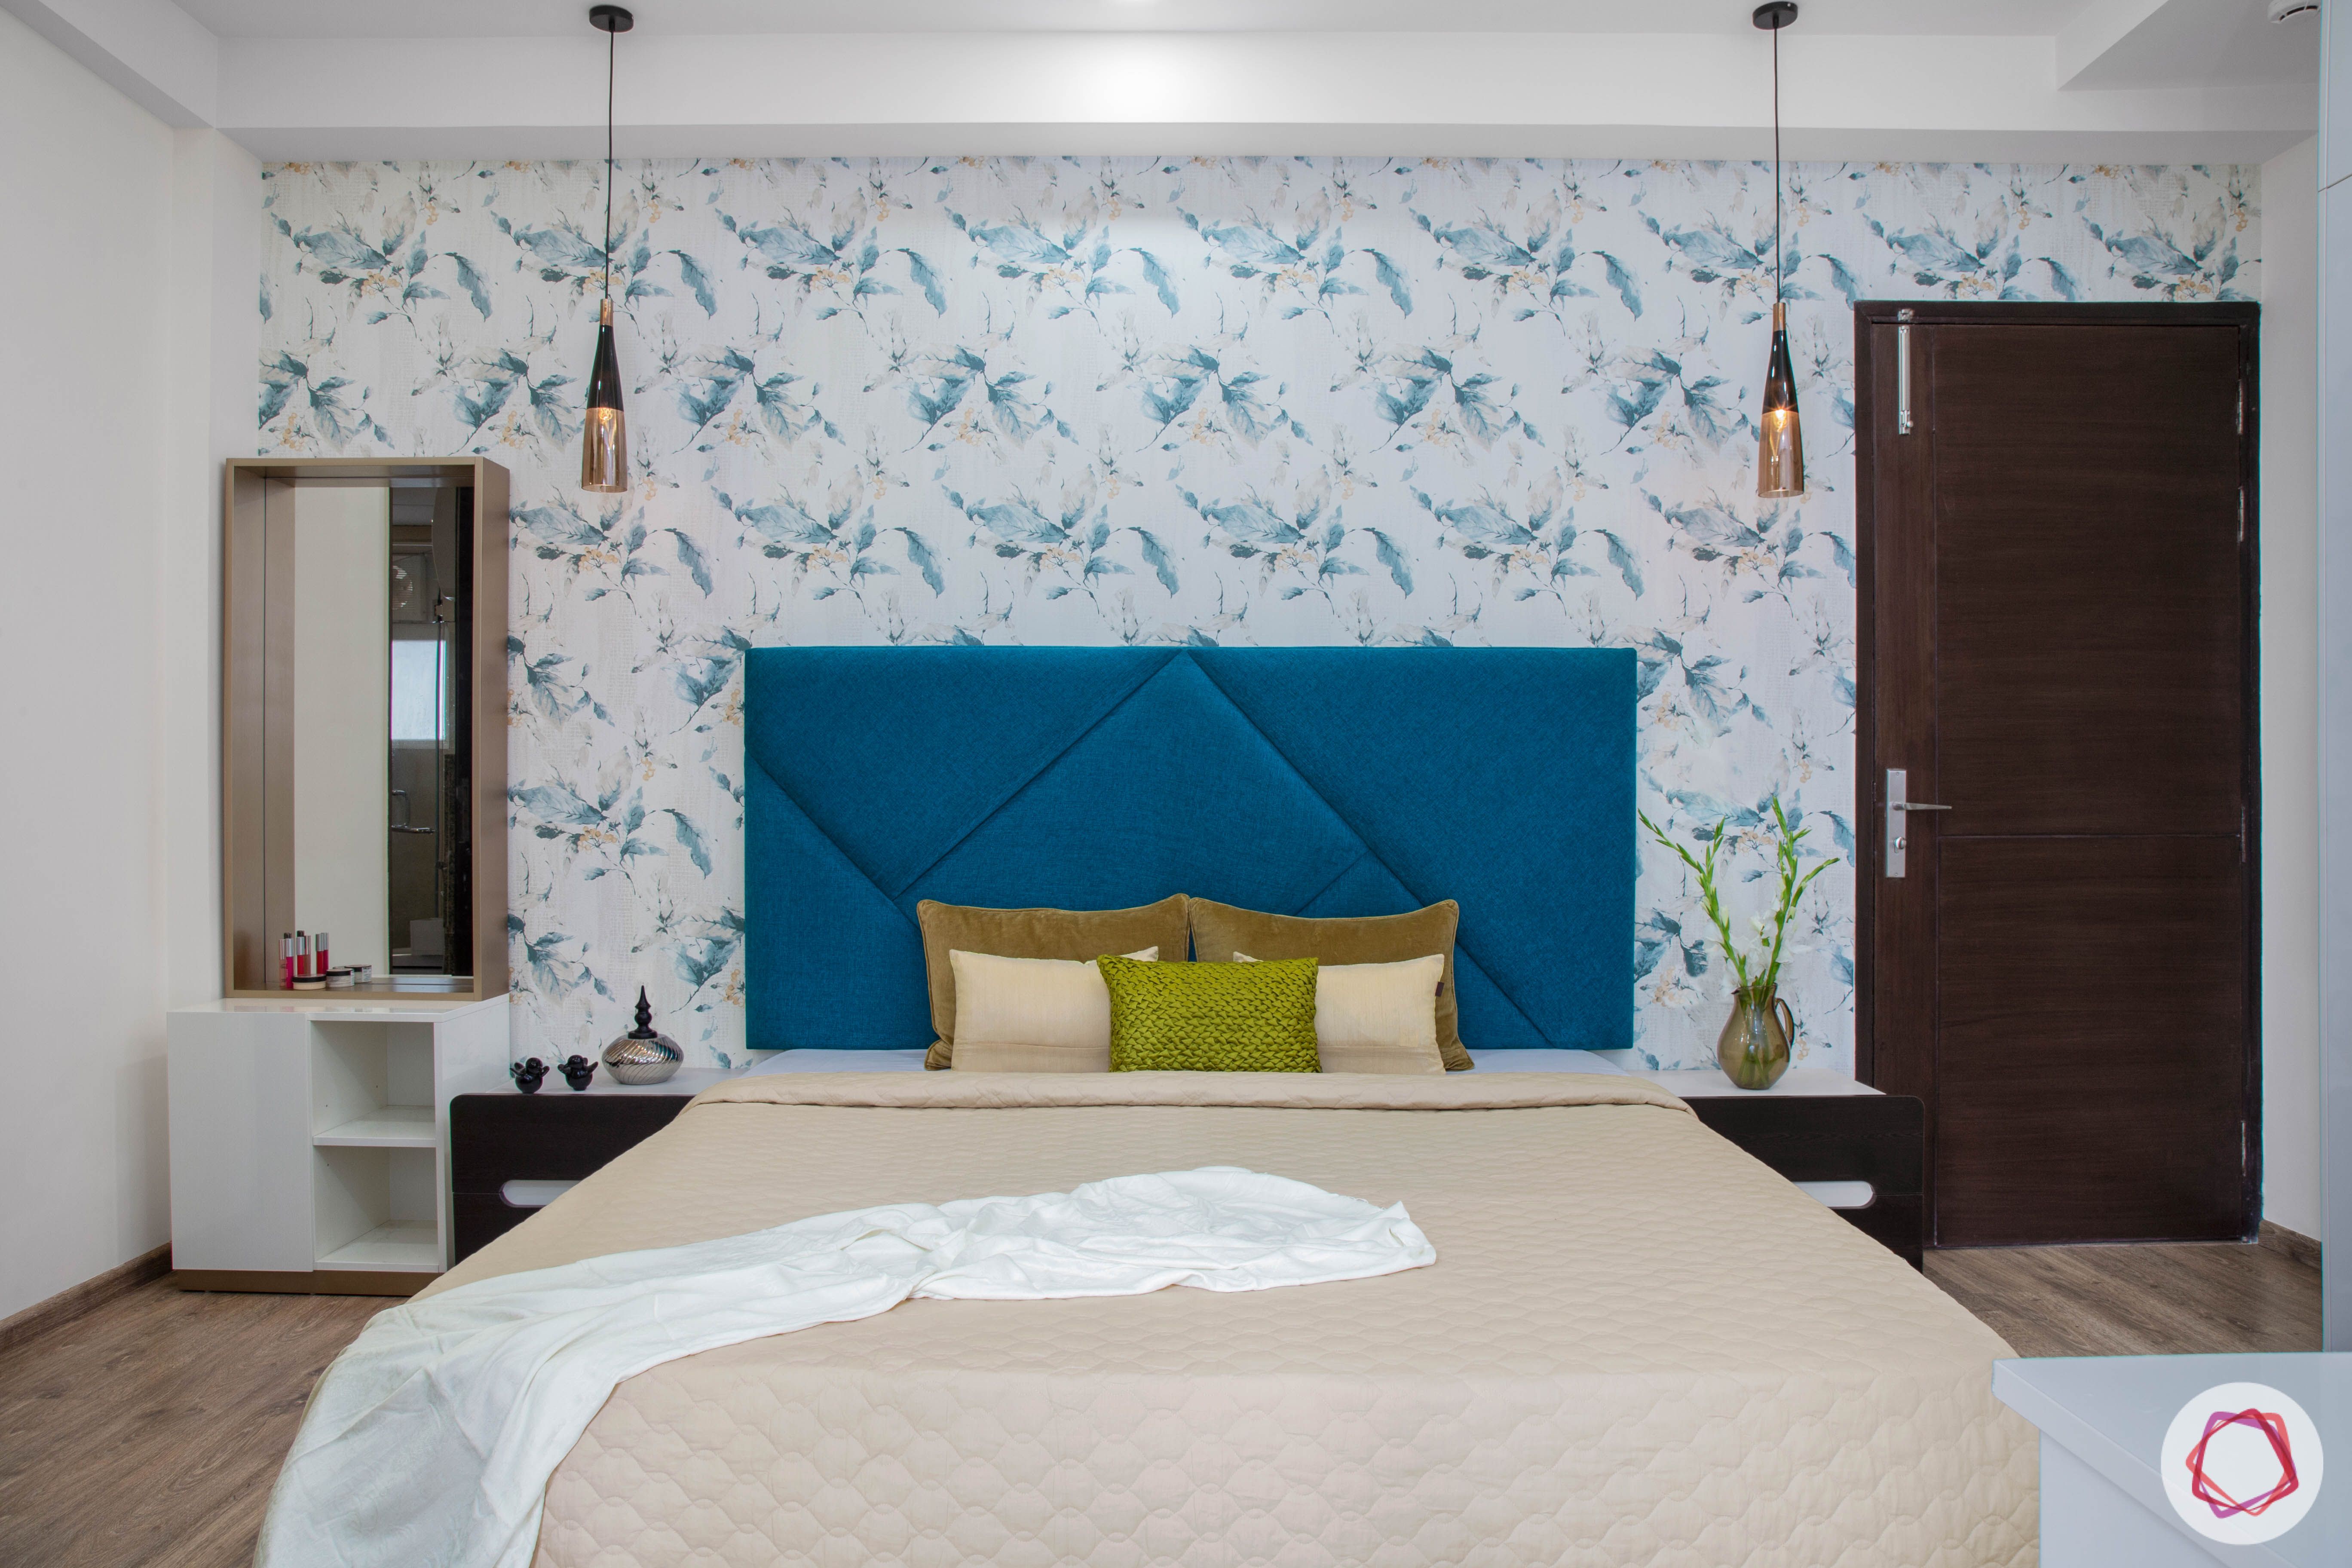 Cleo county noida_master bedroom with floral wallpaper and pendant lights